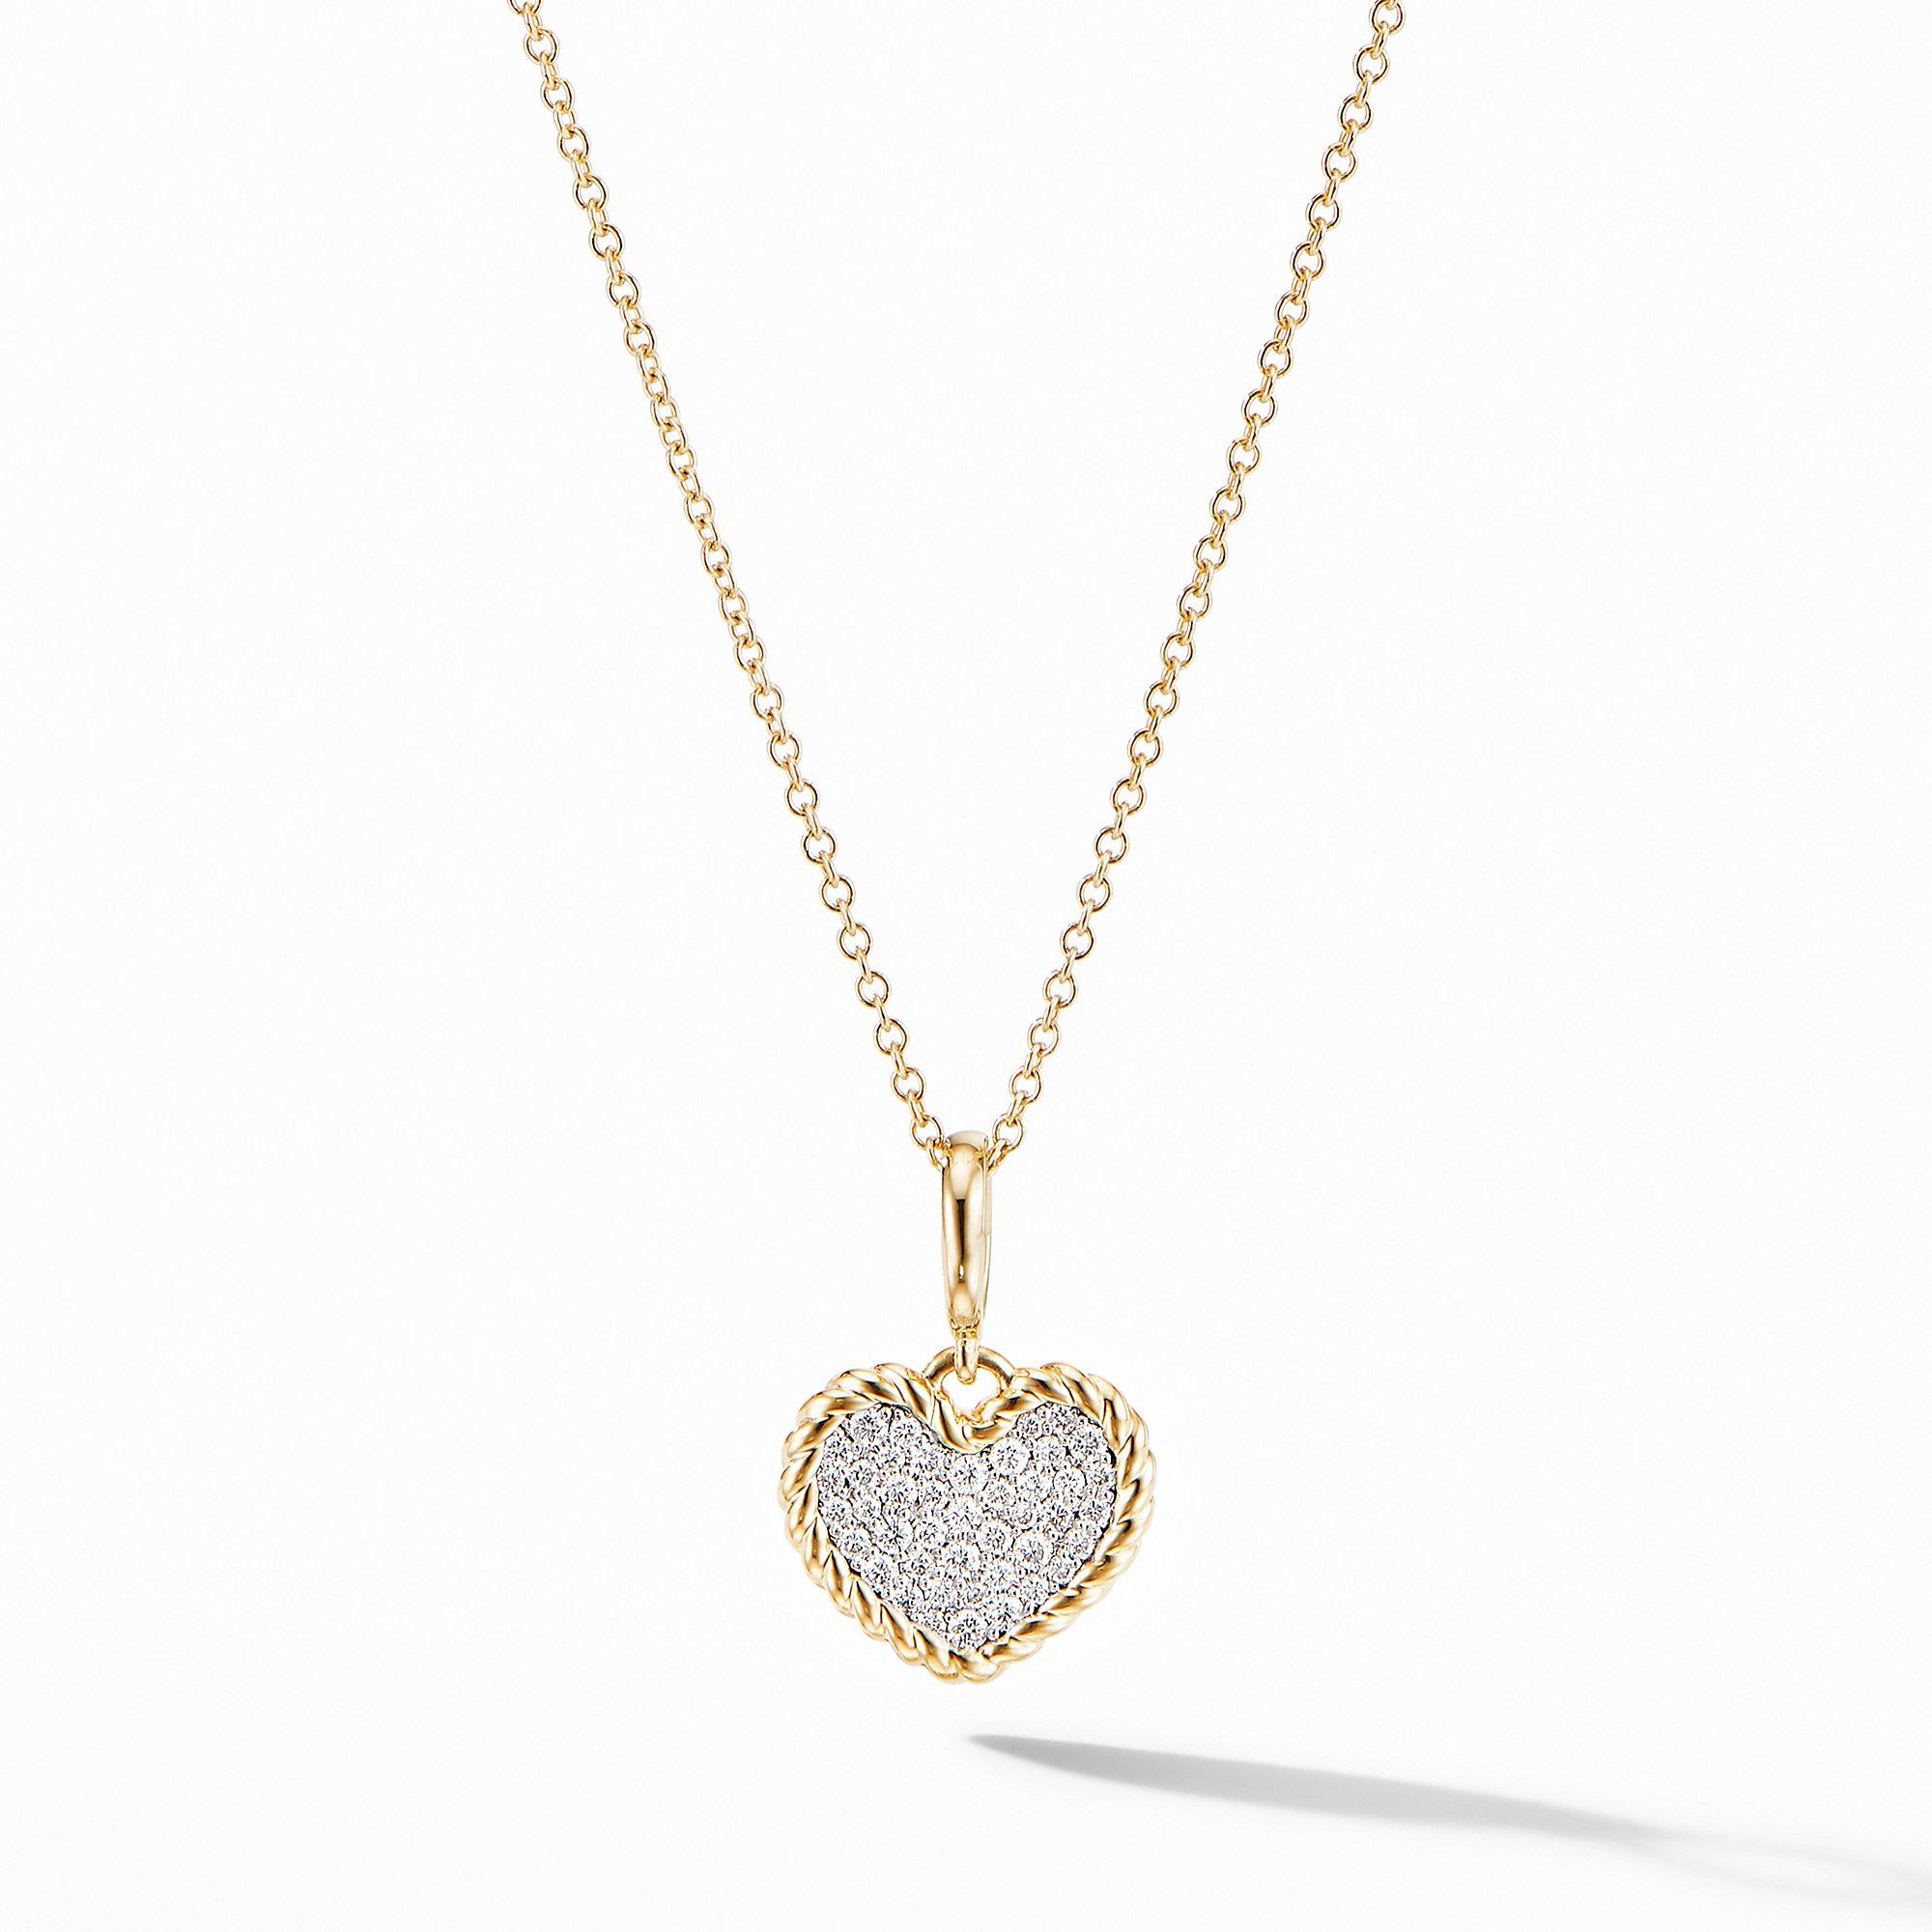 David Yurman Cable Collectibles Pave Plate Heart Charm Necklace in 18k Yellow Gold